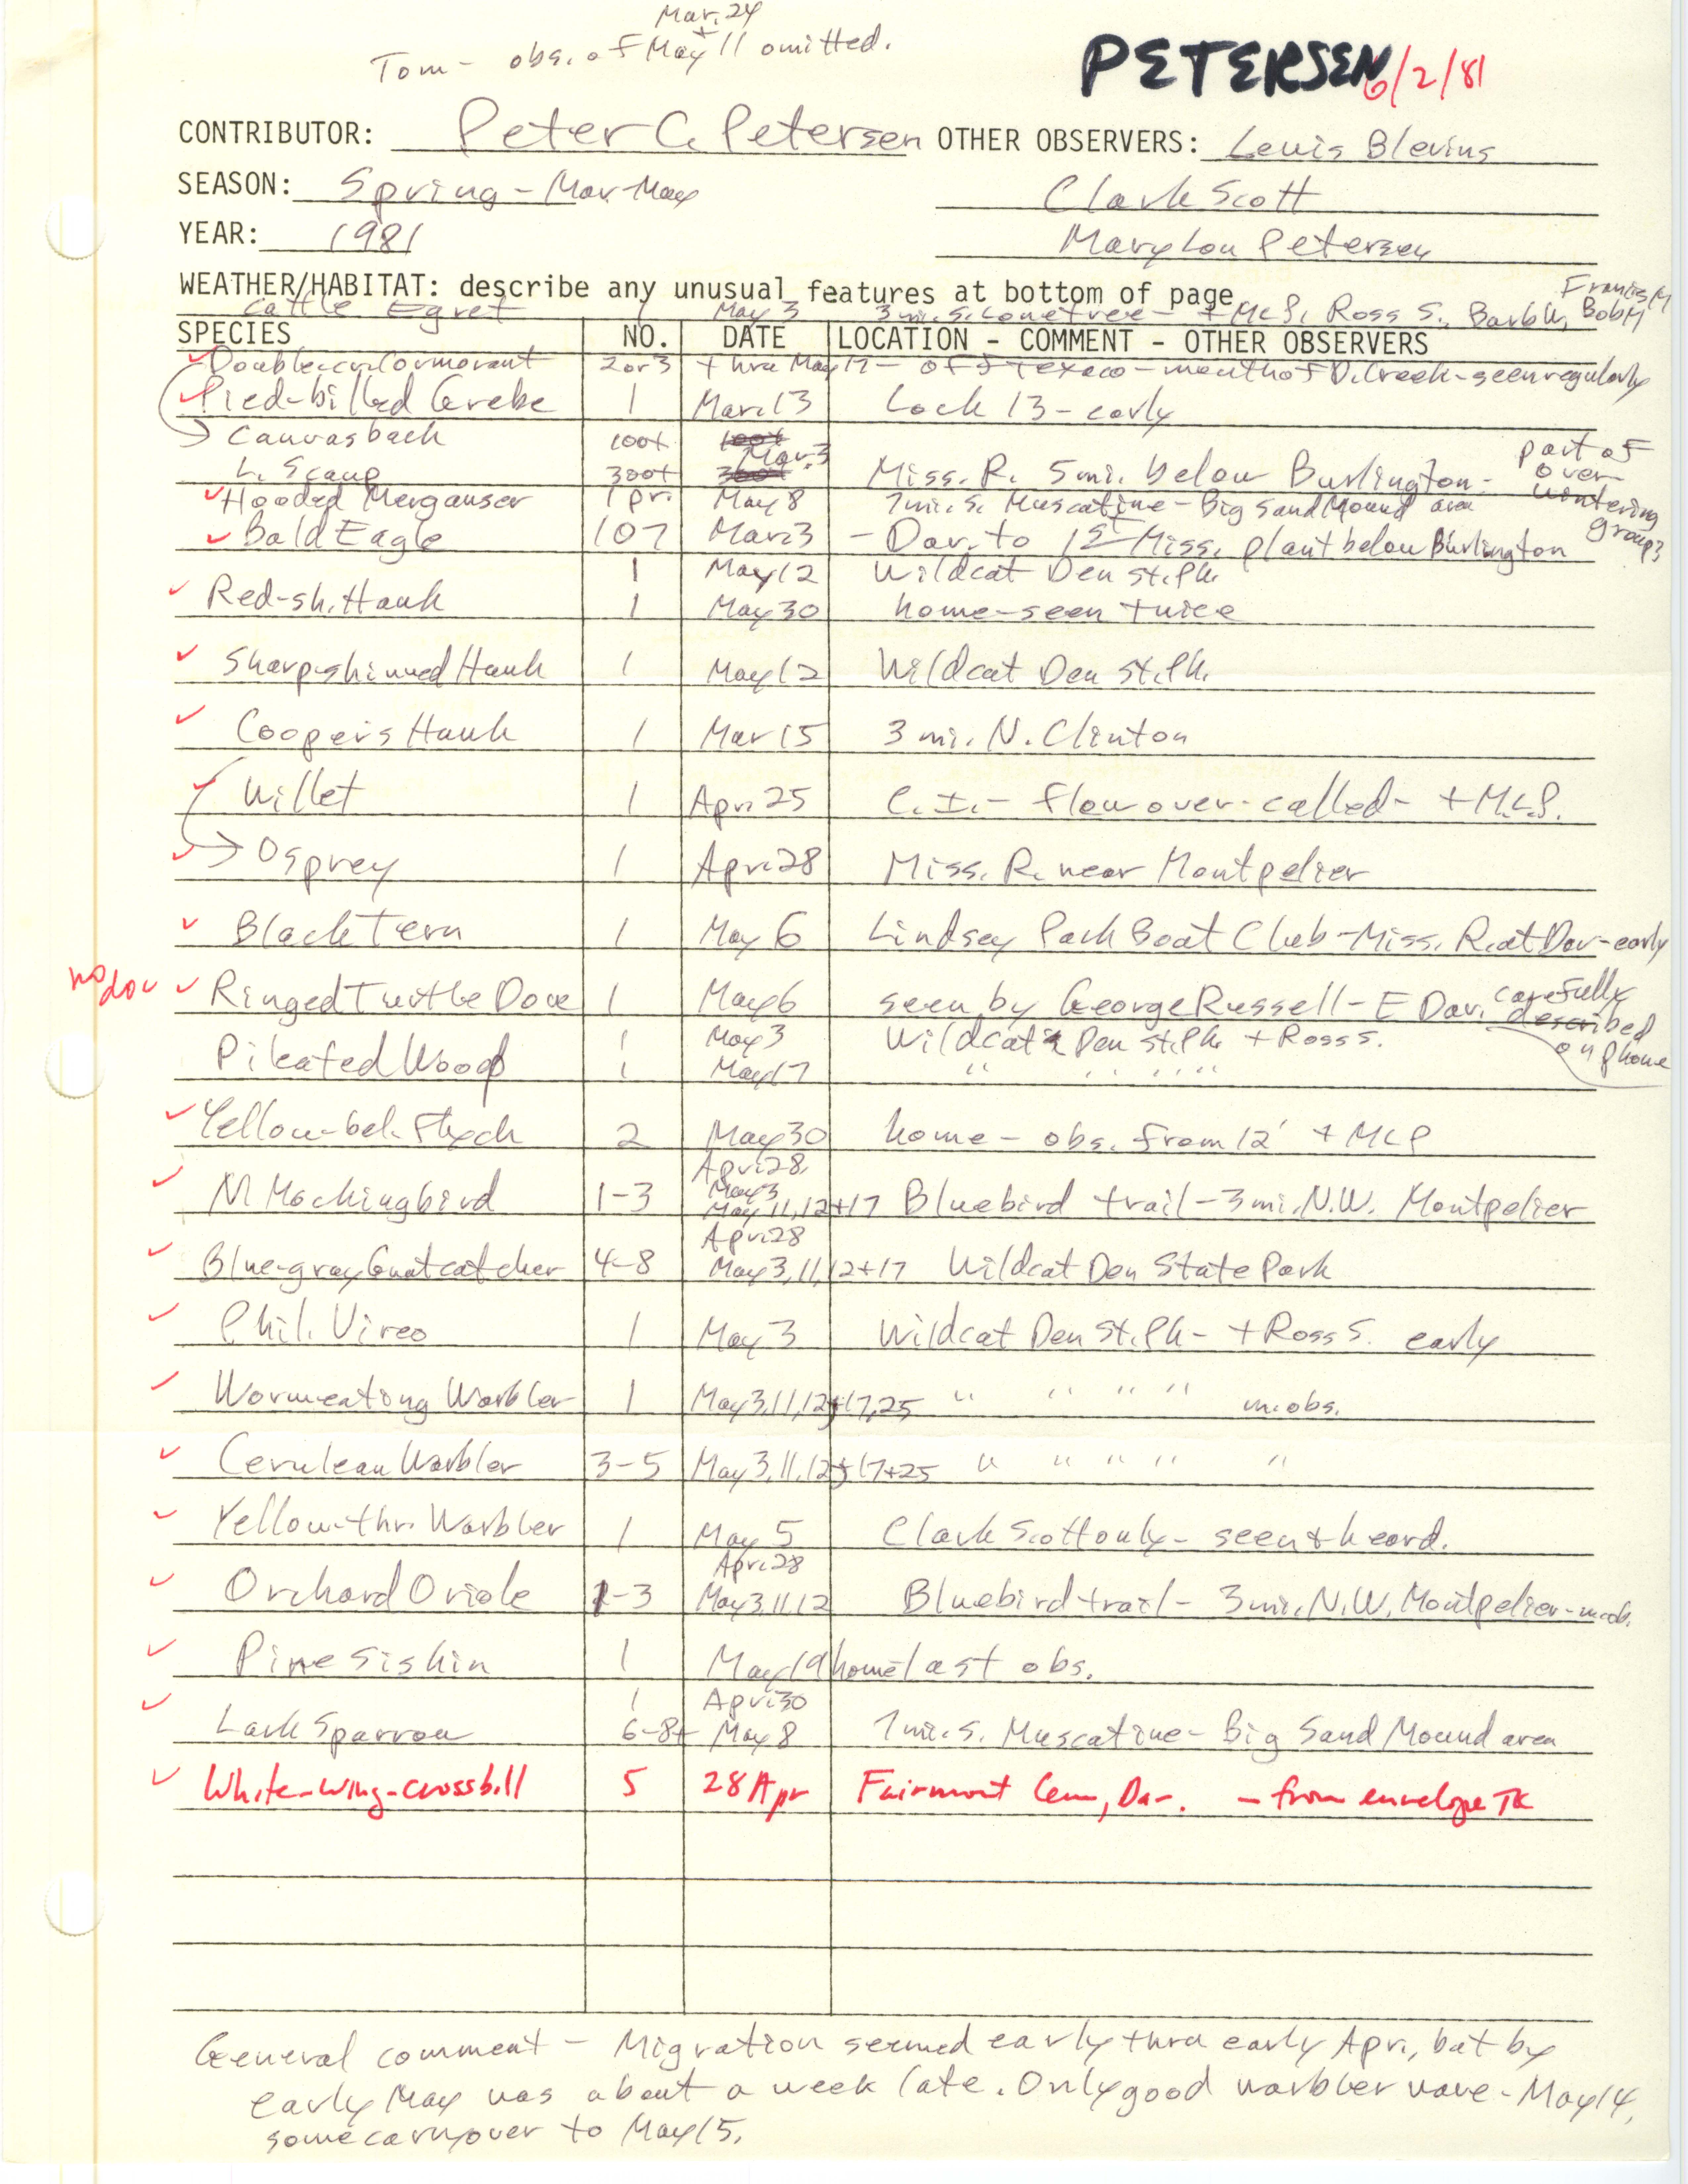 Annotated bird sighting list for spring 1981 compiled by Pete Petersen